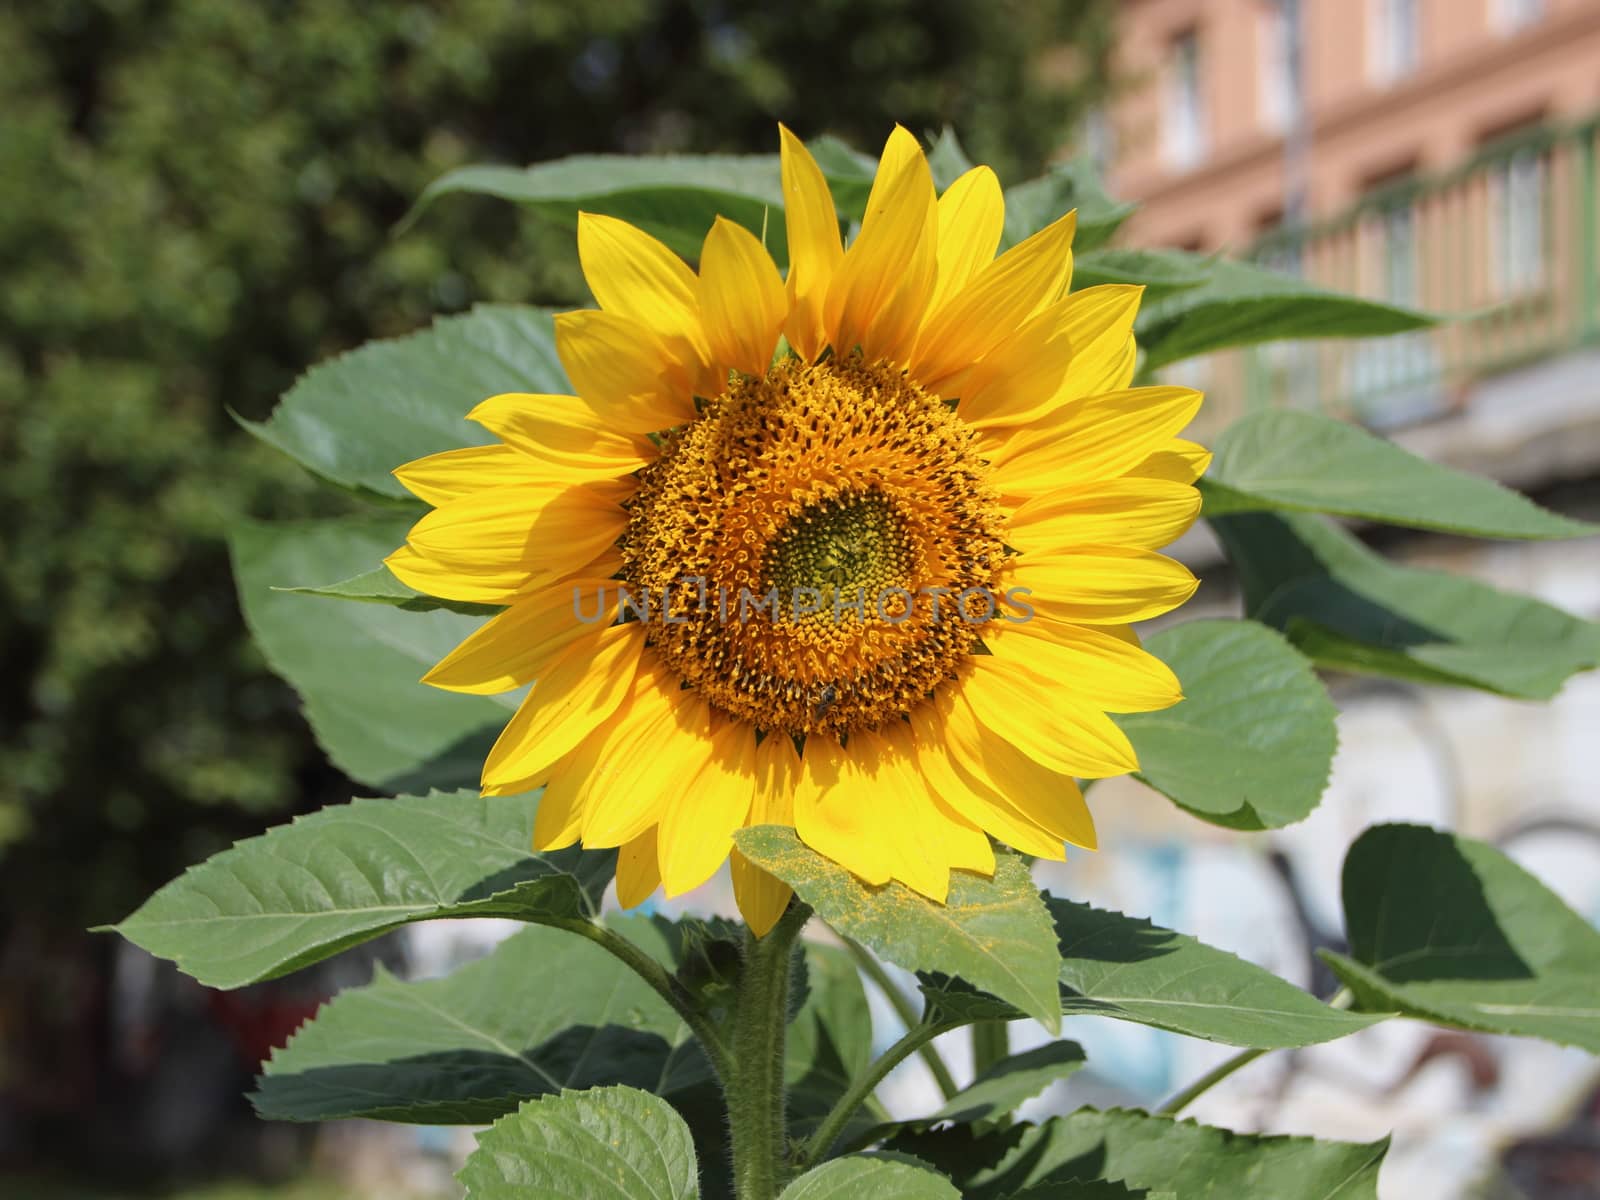 Yellow Urban Sunflower and Leaves with City Apartment Background